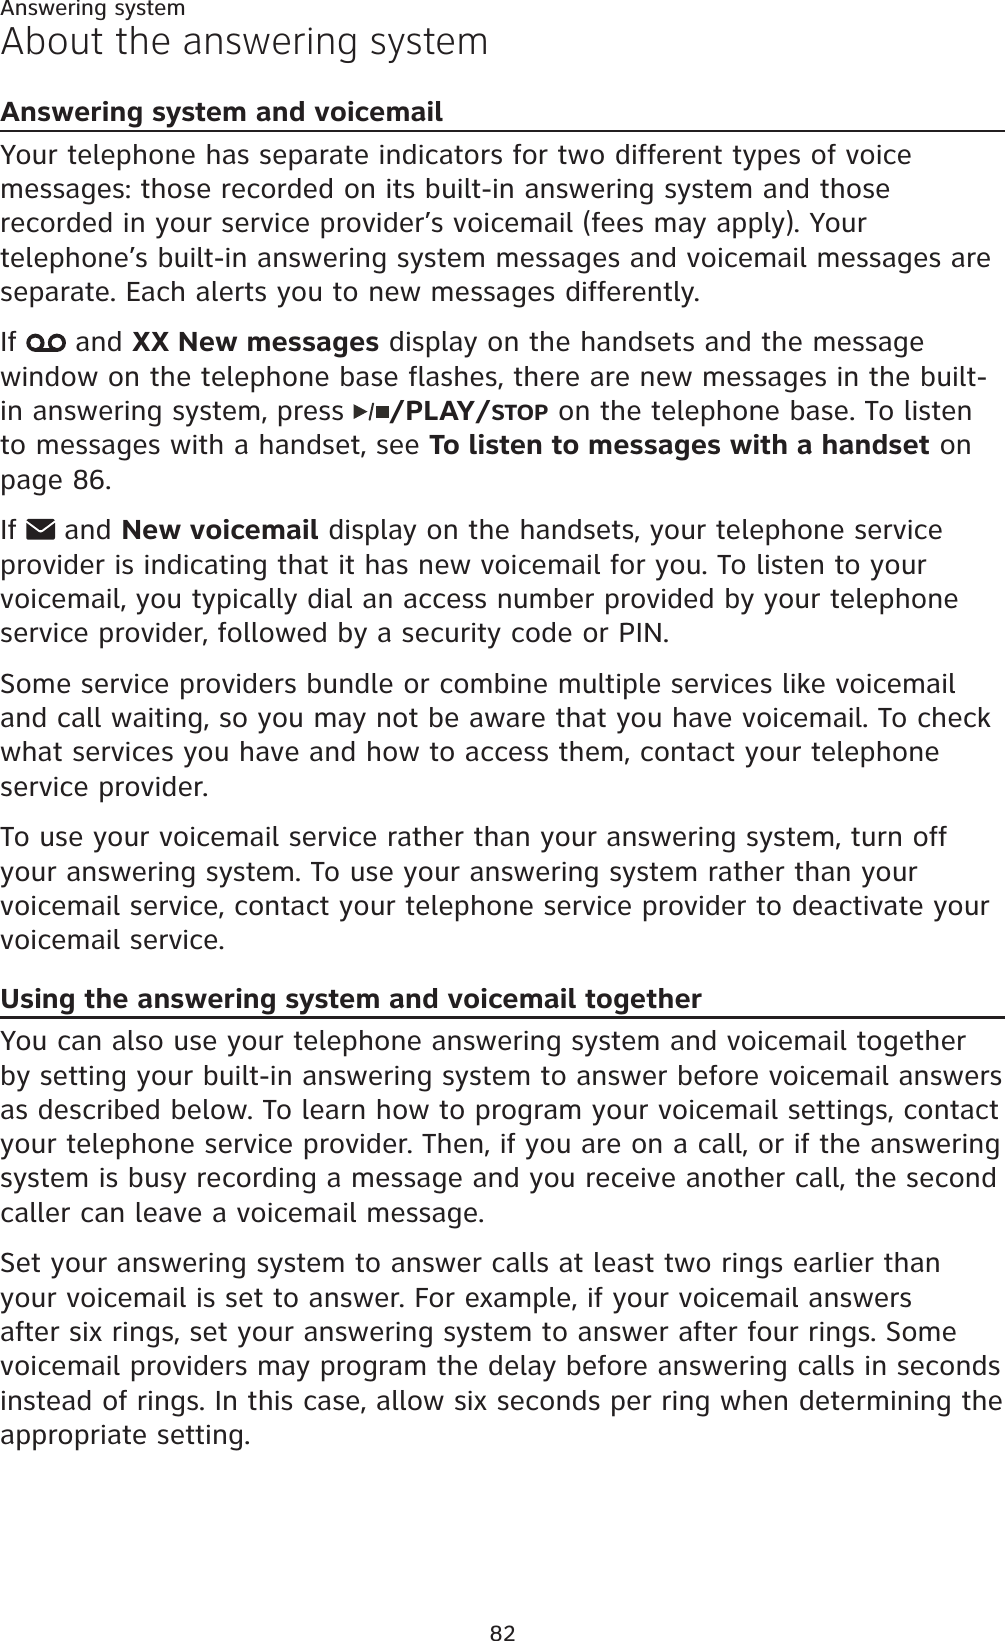 82About the answering systemAnswering system and voicemailYour telephone has separate indicators for two different types of voice messages: those recorded on its built-in answering system and those recorded in your service provider’s voicemail (fees may apply). Your telephone’s built-in answering system messages and voicemail messages are separate. Each alerts you to new messages differently.If  and XX New messages display on the handsets and the message window on the telephone base flashes, there are new messages in the built-in answering system, press  /PLAY/STOP on the telephone base. To listen to messages with a handset, see To listen to messages with a handset on page 86.If  and New voicemail display on the handsets, your telephone service provider is indicating that it has new voicemail for you. To listen to your voicemail, you typically dial an access number provided by your telephone service provider, followed by a security code or PIN.Some service providers bundle or combine multiple services like voicemail and call waiting, so you may not be aware that you have voicemail. To check what services you have and how to access them, contact your telephone service provider.To use your voicemail service rather than your answering system, turn off your answering system. To use your answering system rather than your voicemail service, contact your telephone service provider to deactivate your voicemail service. Using the answering system and voicemail togetherYou can also use your telephone answering system and voicemail together by setting your built-in answering system to answer before voicemail answers as described below. To learn how to program your voicemail settings, contact your telephone service provider. Then, if you are on a call, or if the answering system is busy recording a message and you receive another call, the second caller can leave a voicemail message.Set your answering system to answer calls at least two rings earlier than your voicemail is set to answer. For example, if your voicemail answers after six rings, set your answering system to answer after four rings. Some voicemail providers may program the delay before answering calls in seconds instead of rings. In this case, allow six seconds per ring when determining the appropriate setting.Answering system